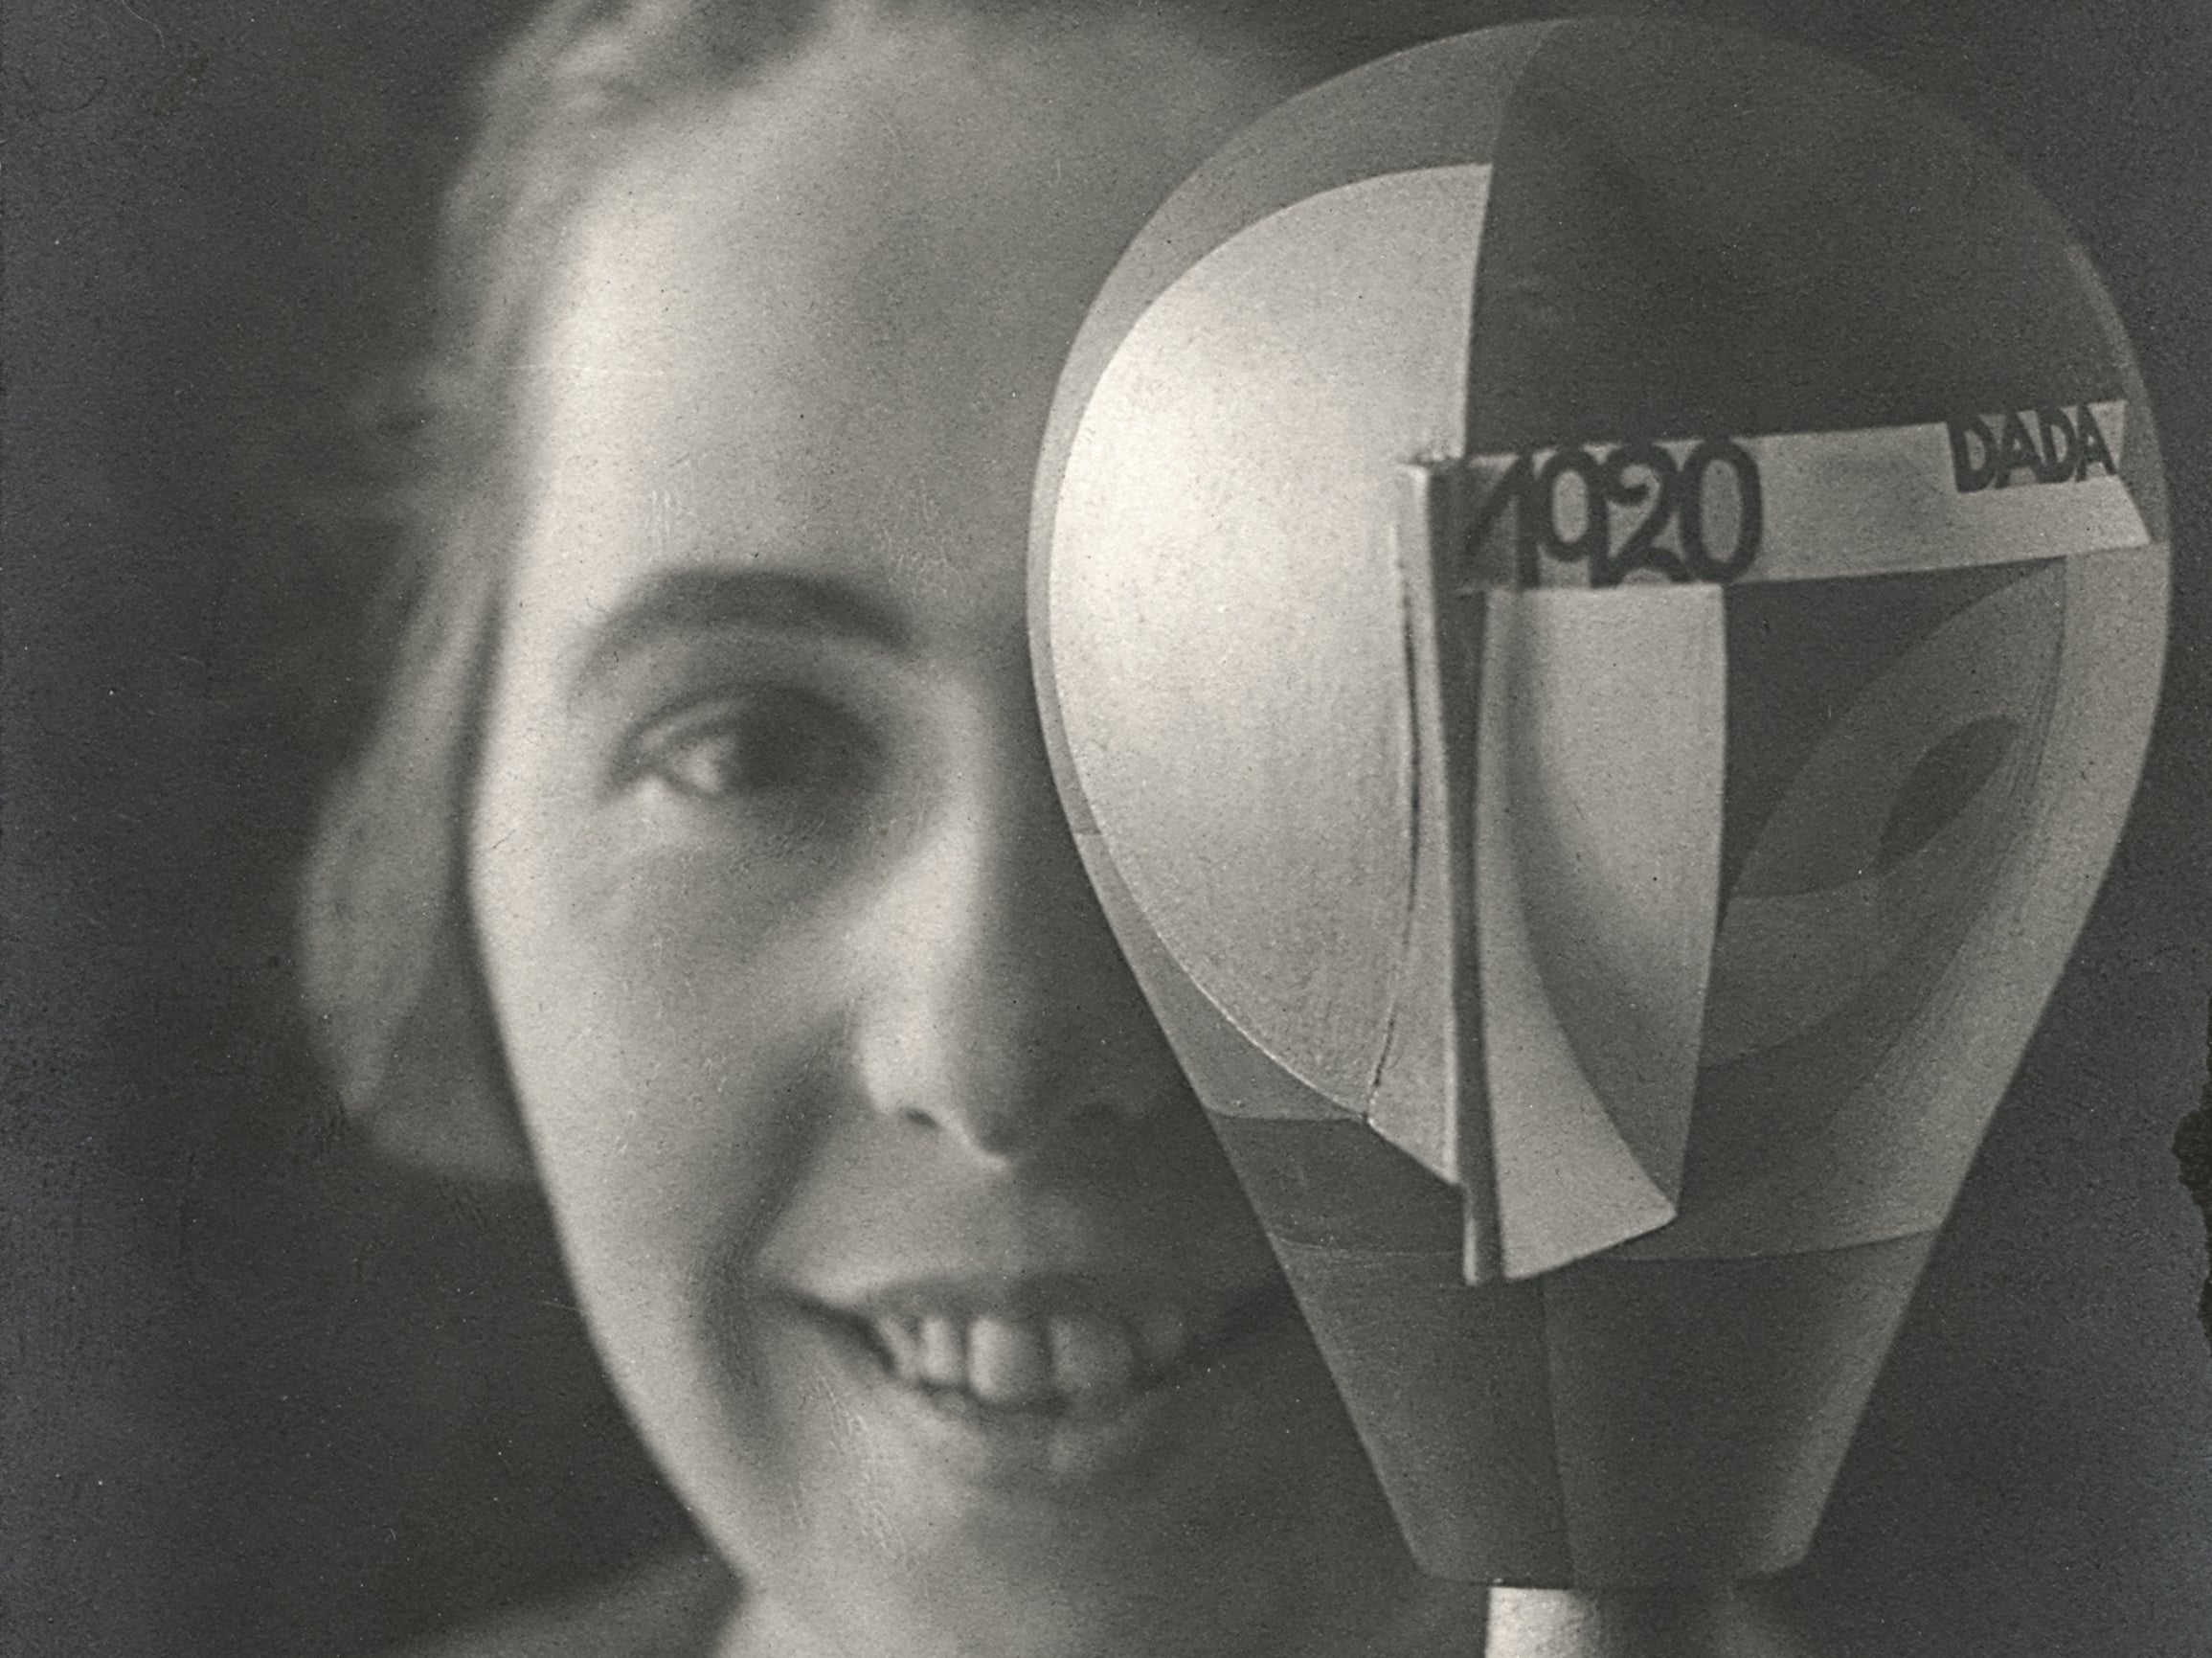 ‘Sophie Taeuber with her Dada head’, 1920, by Nicolai Aluf